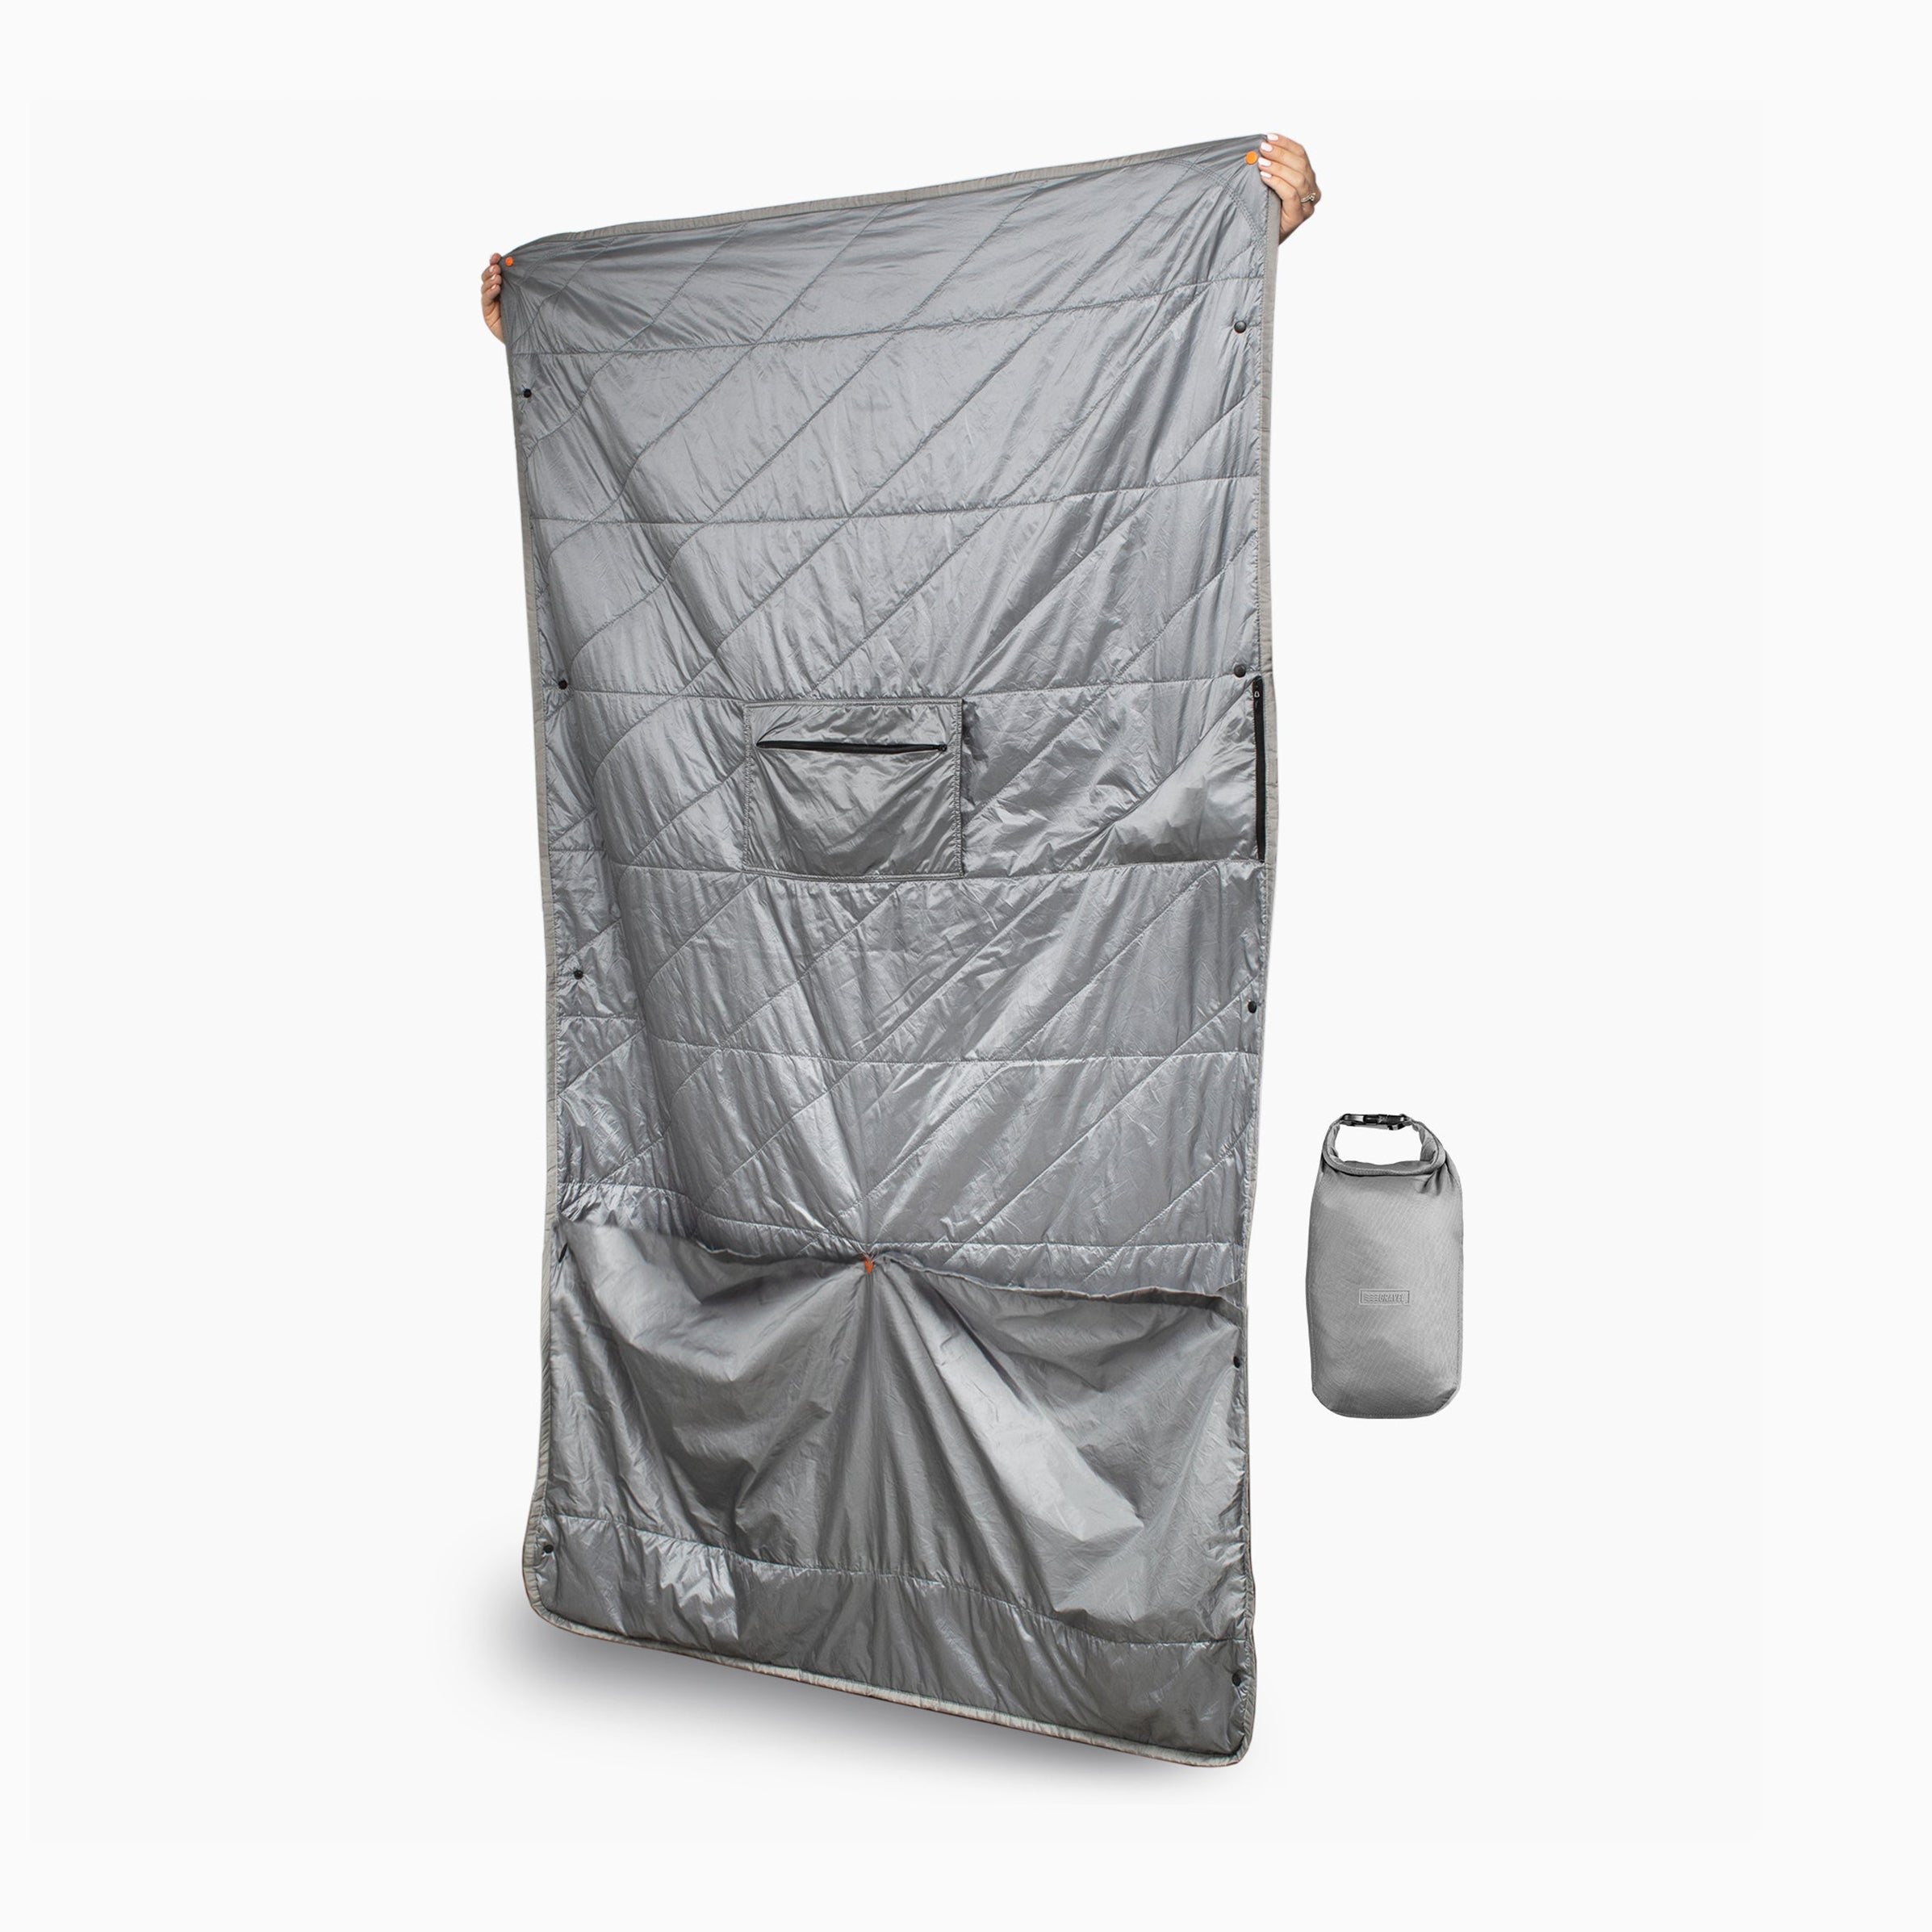 Layover™ Travel Blanket - Insulated & Packable | Gray